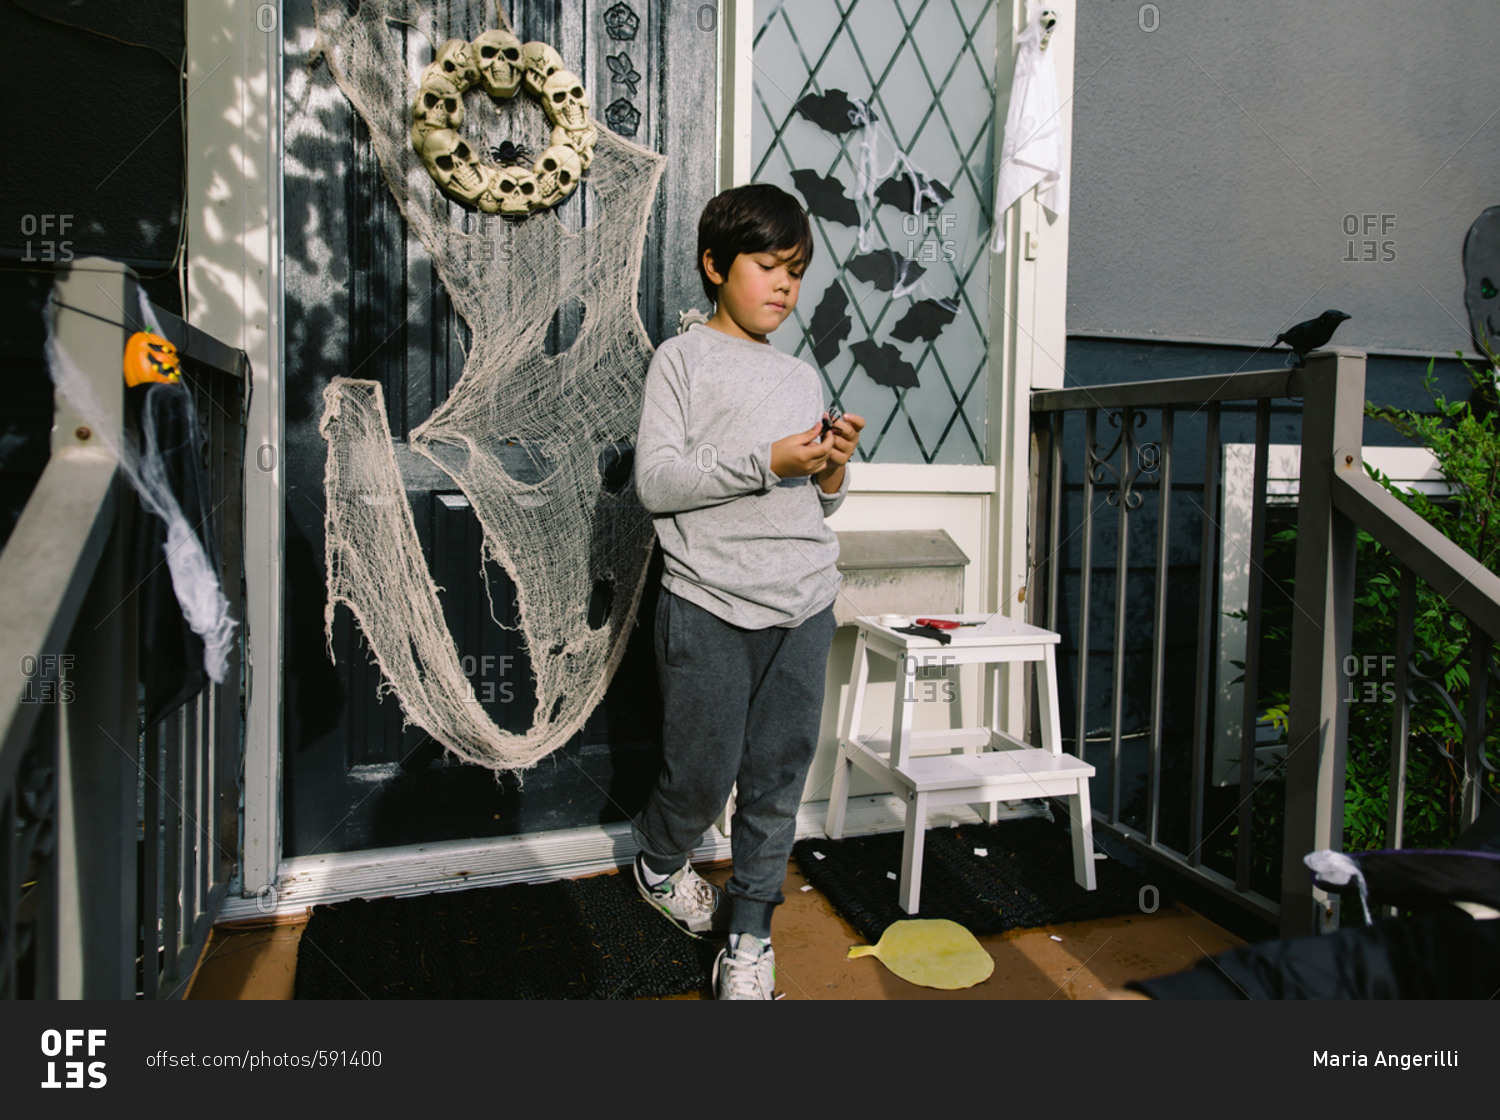 Boy decorating font porch for Halloween